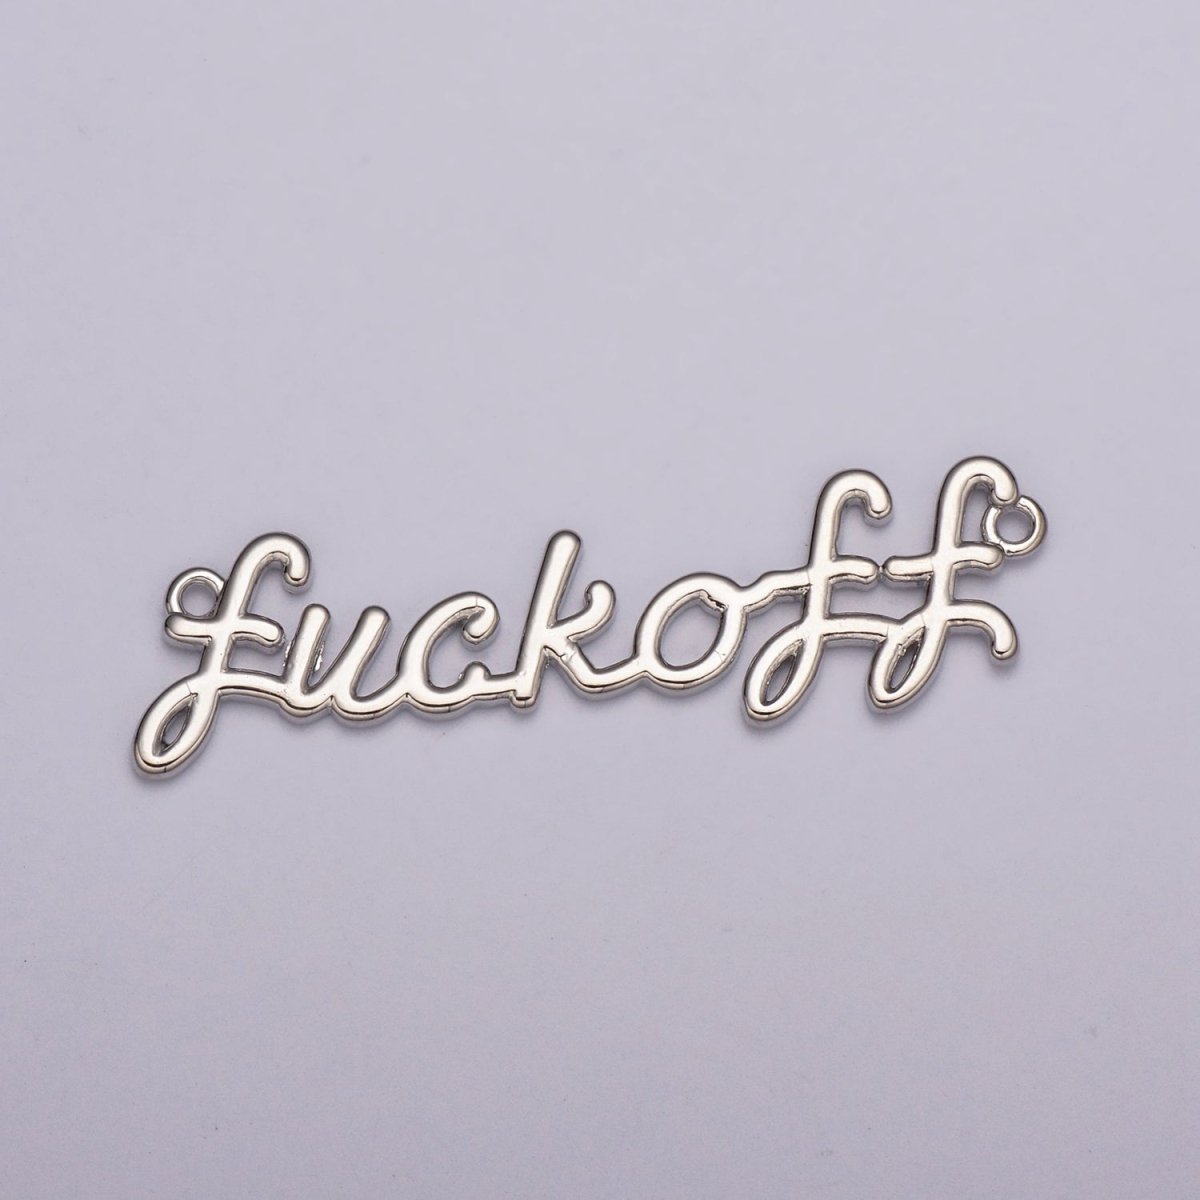 Dainty Gold Filled Fuck Off Charm for Necklace Bracelet, Fuckoff Link Connector, Fuck Off Word Cursive Jewelry Silver Personalized Script Necklace, Swear Word Pendant Trend Jewelry N-088 N-089 - DLUXCA